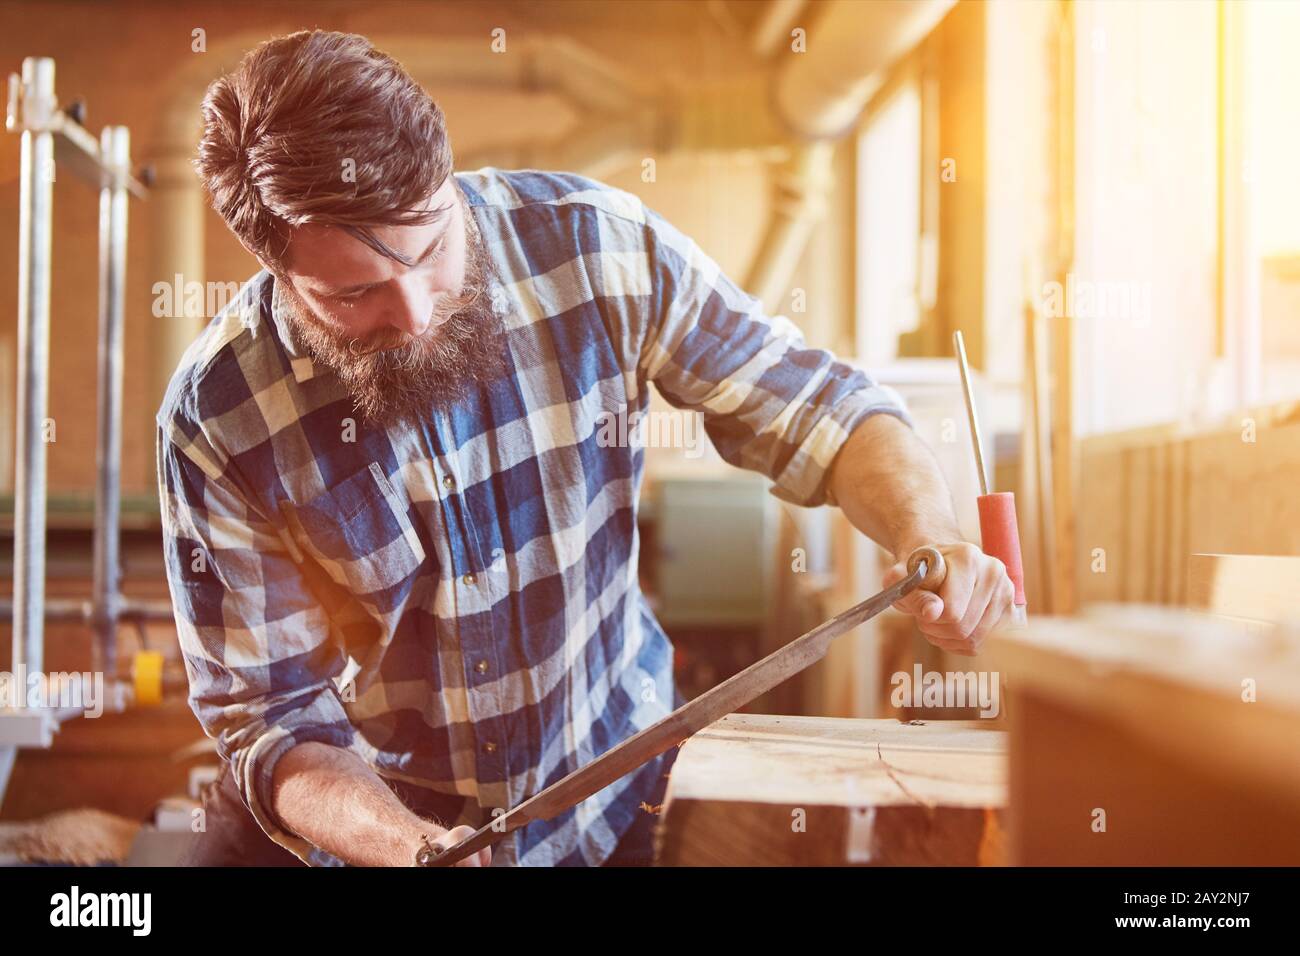 Carpenters debarking wood with peeling irons in the joinery Stock Photo